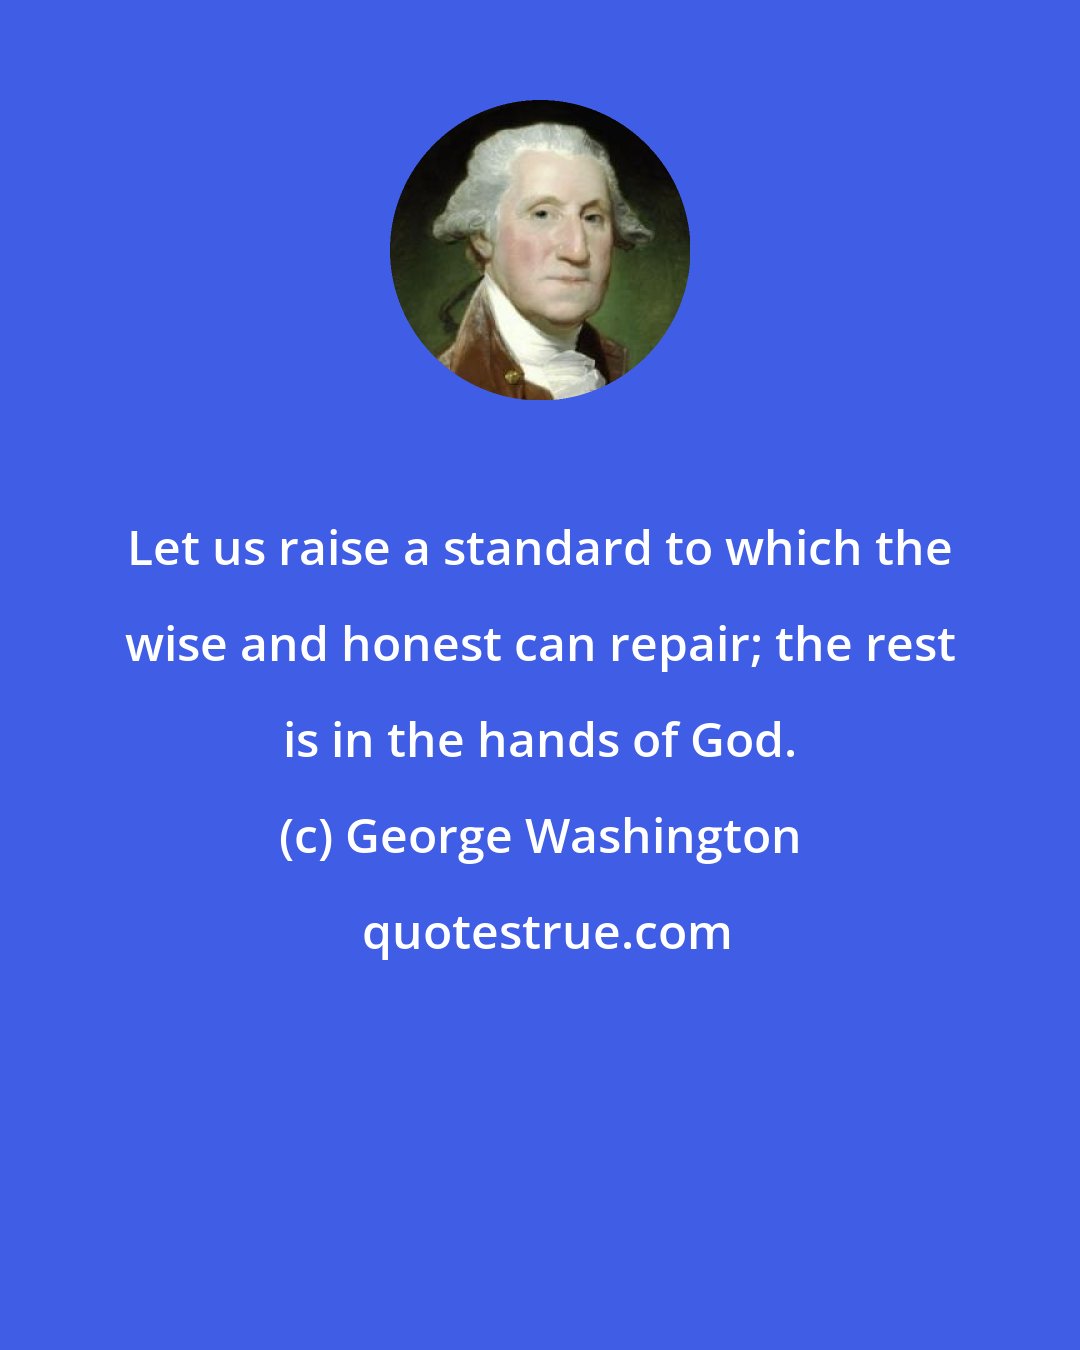 George Washington: Let us raise a standard to which the wise and honest can repair; the rest is in the hands of God.